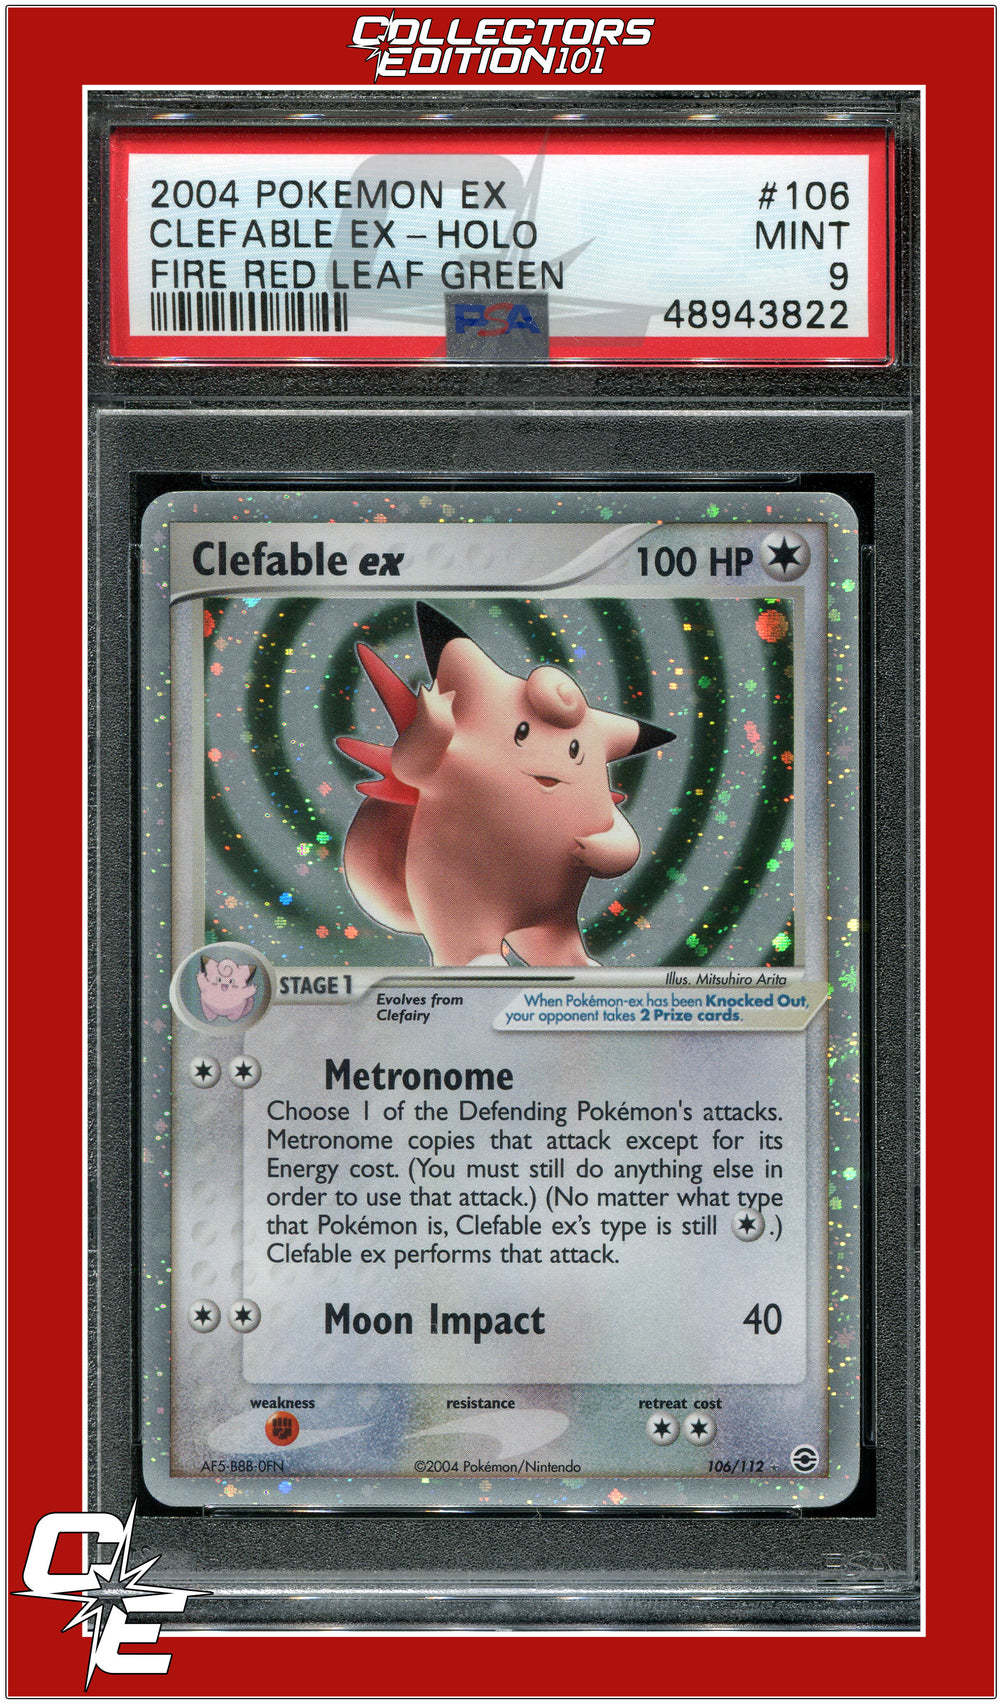 EX FireRed LeafGreen 106 Clefable EX Holo PSA 9